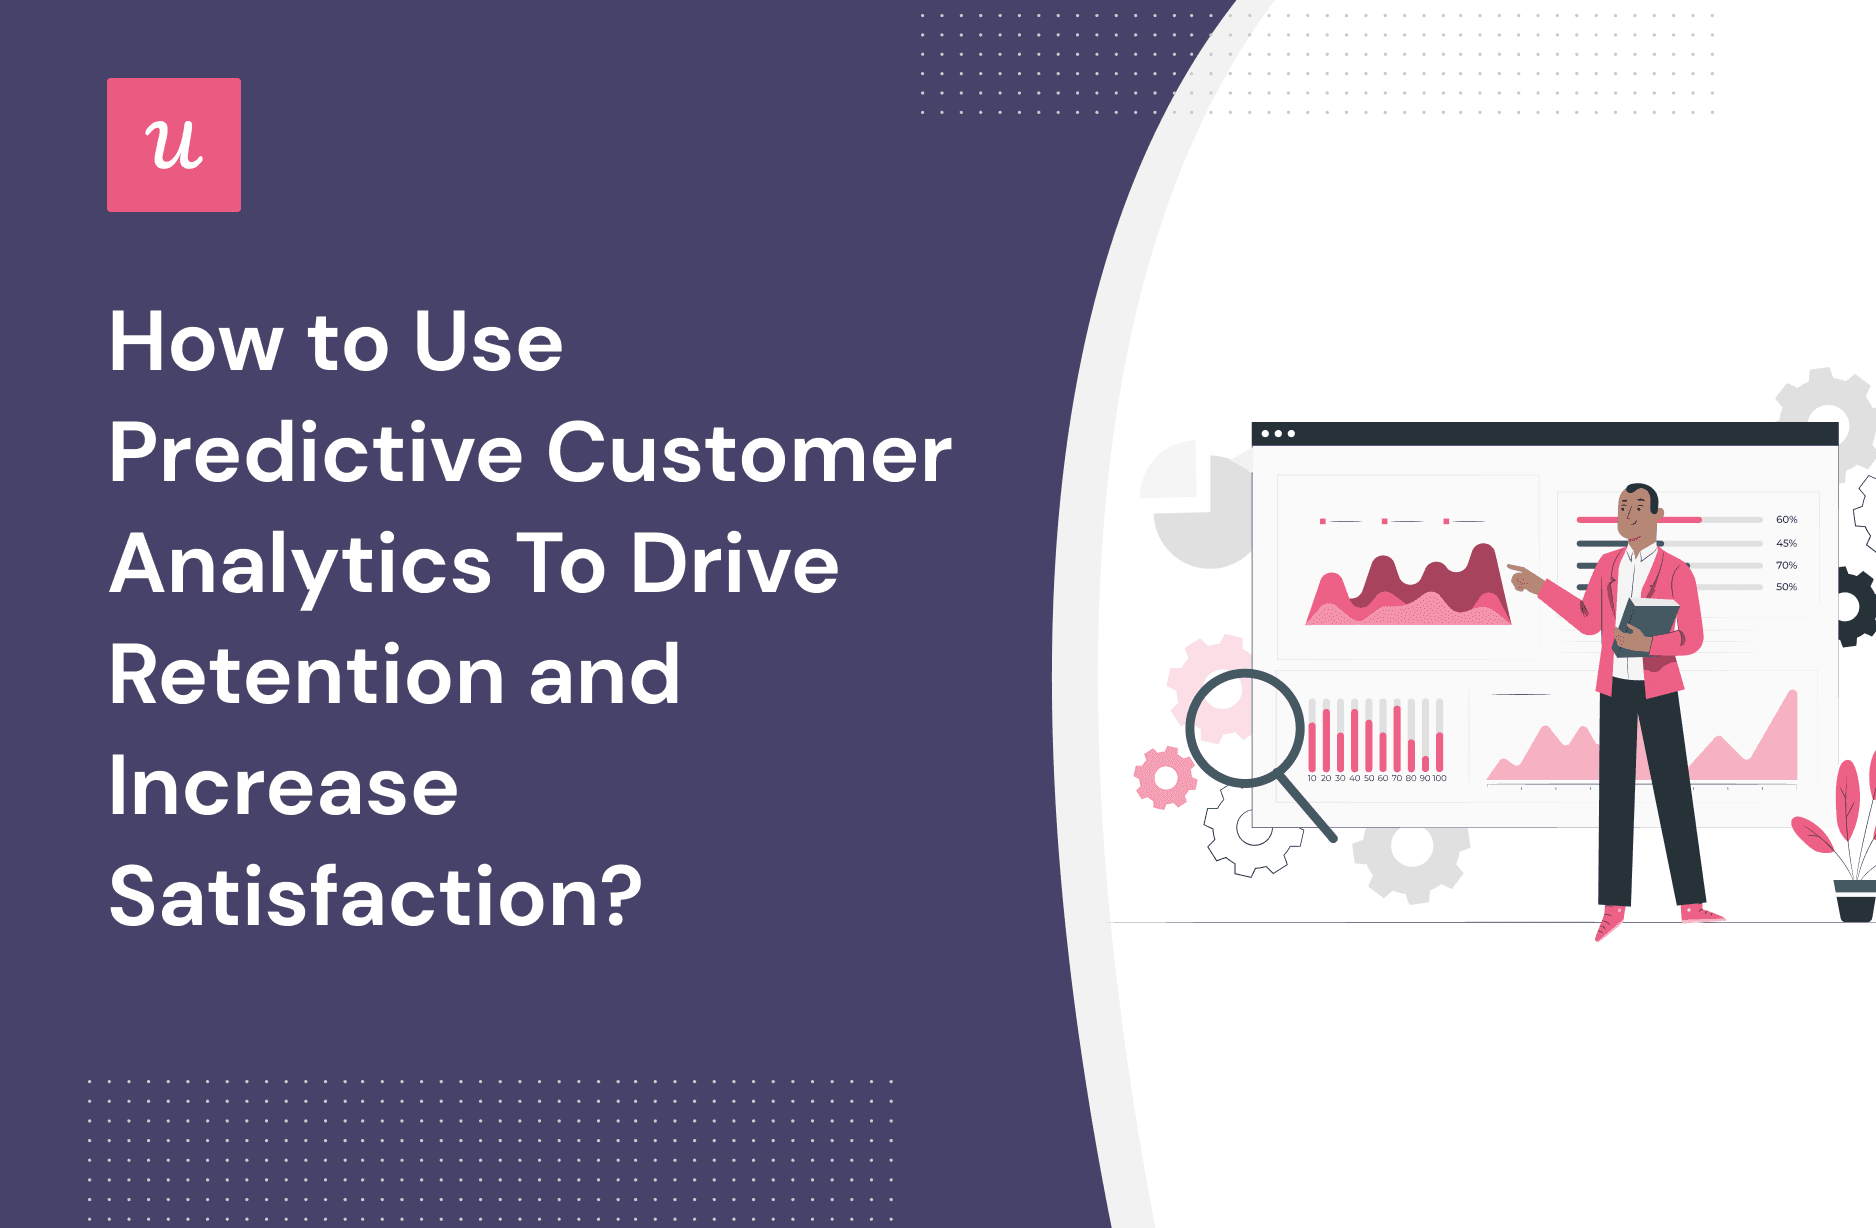 How To Use Predictive Customer Analytics To Drive Retention and Increase Satisfaction? cover